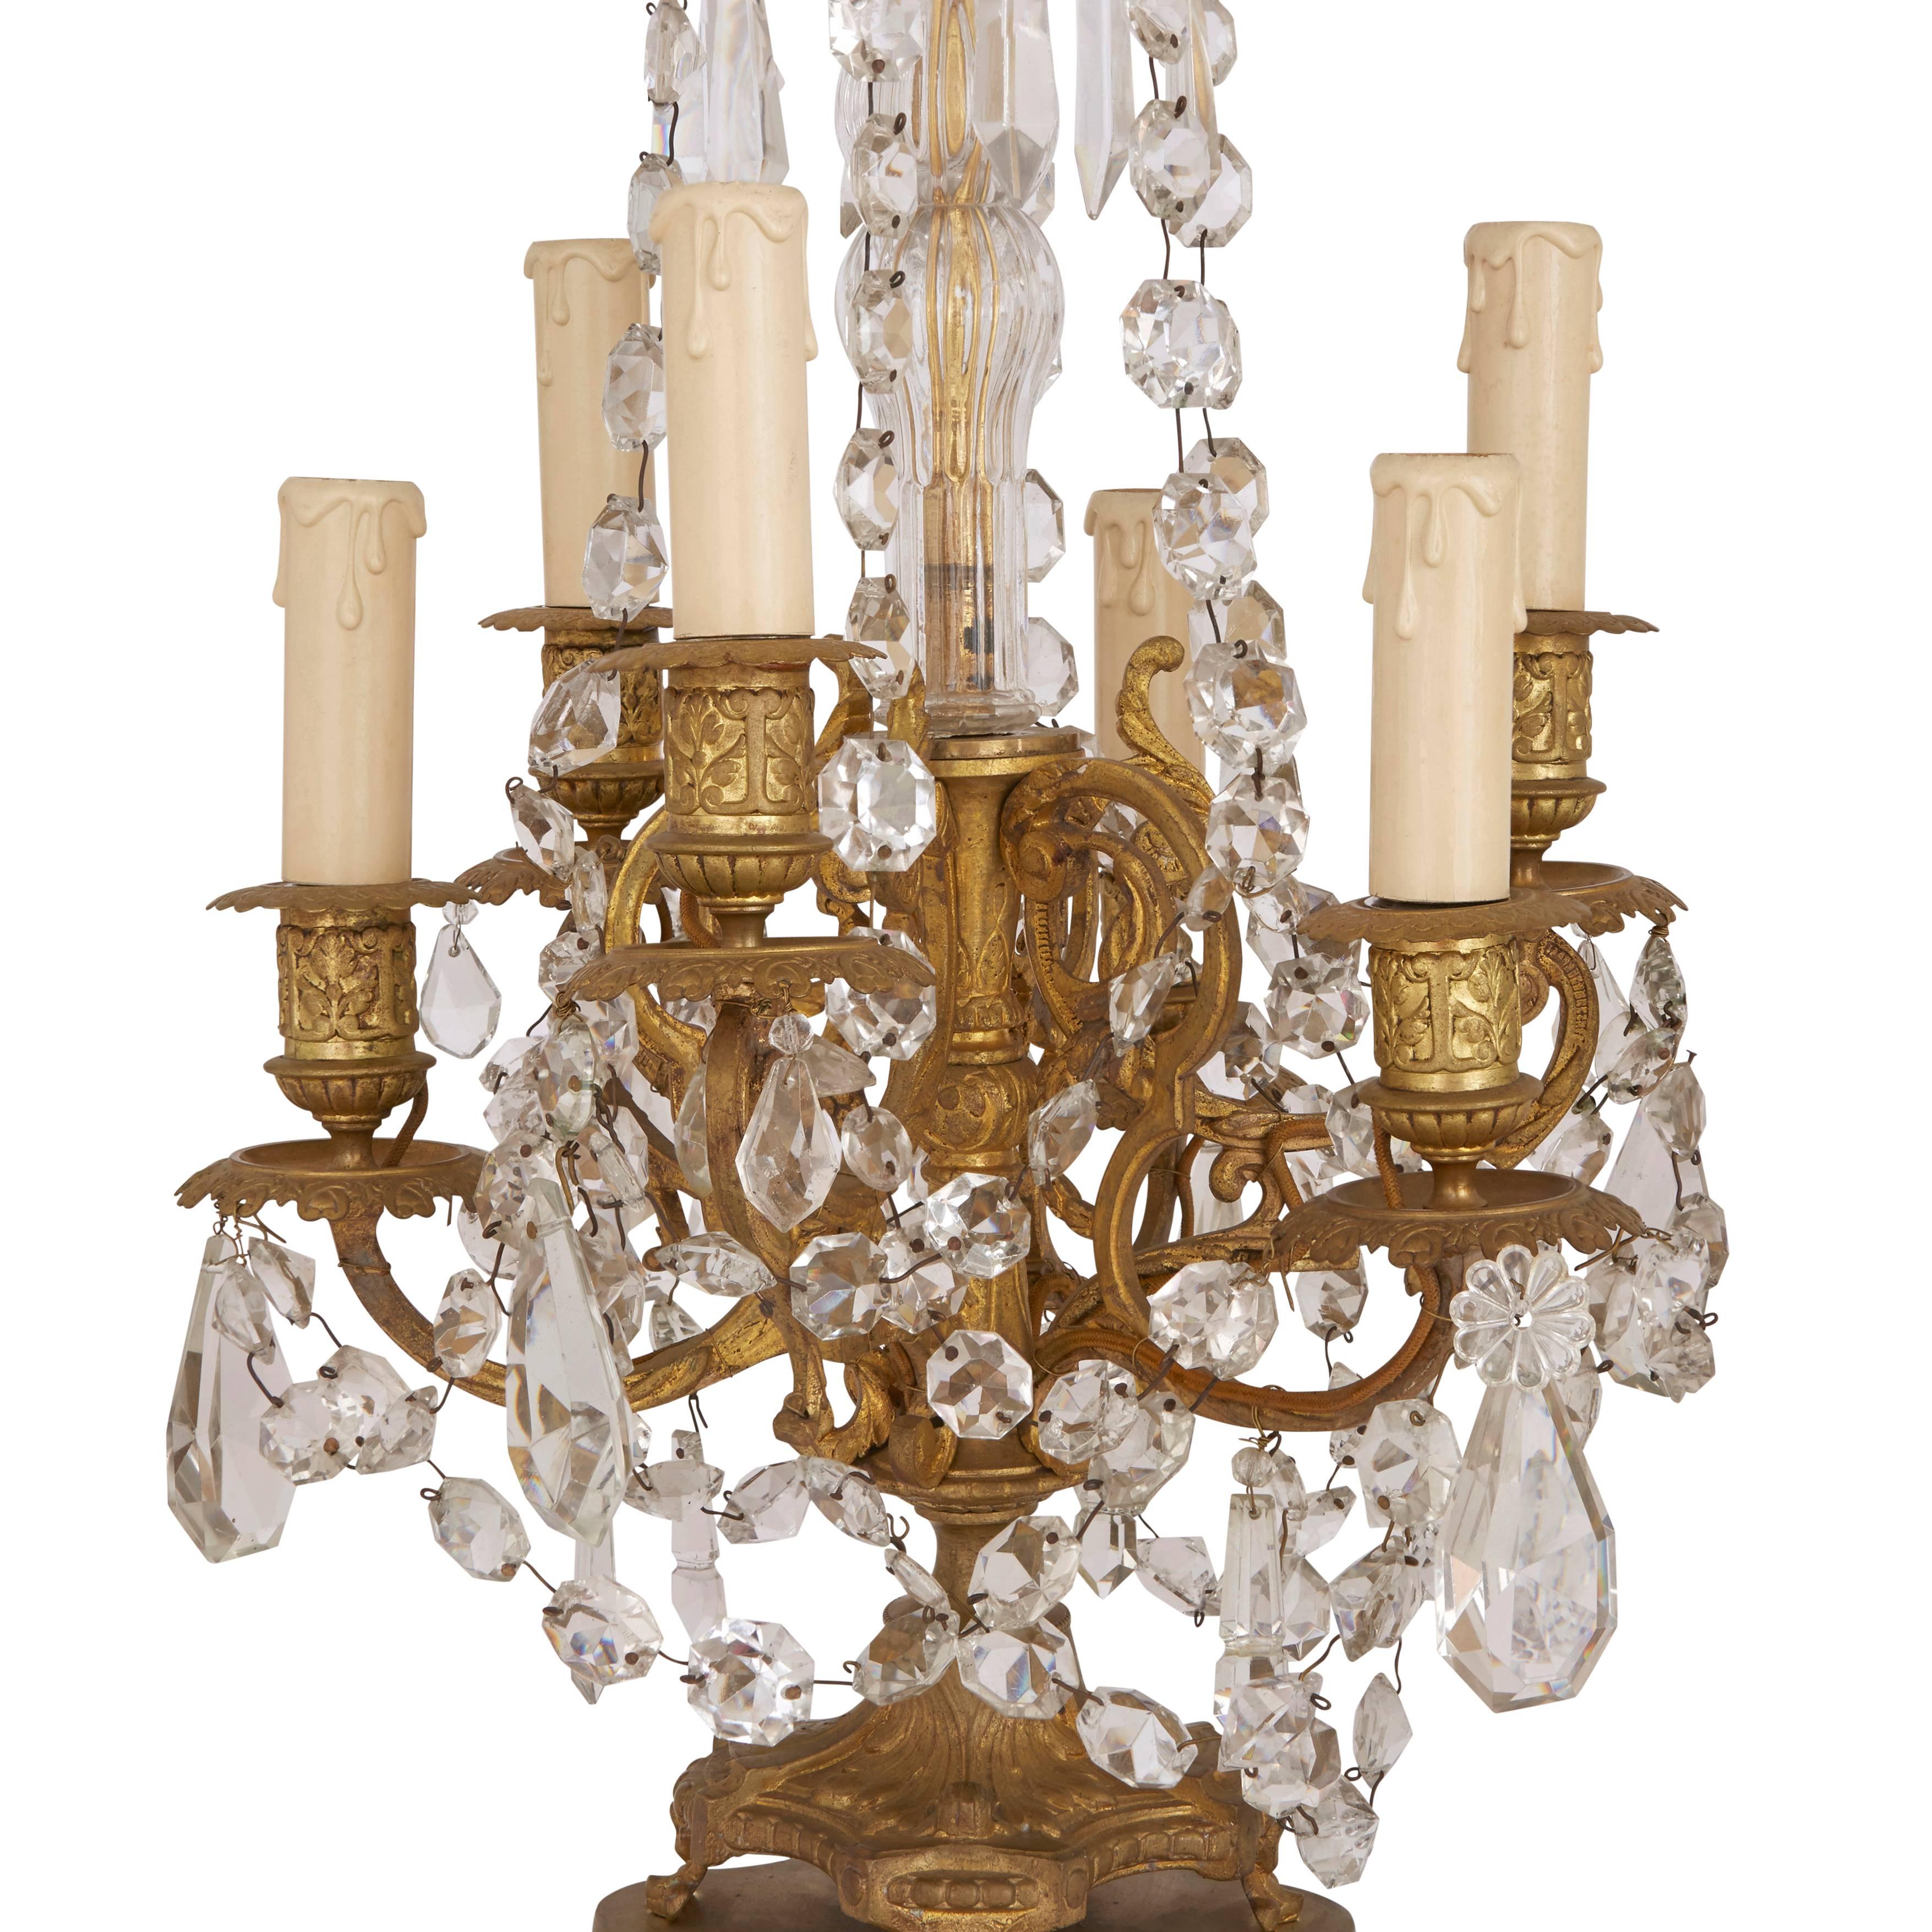 Six-light candelabra, ormolu with a glass spike surmount and two rows of hanging glass daggers and beads, one above and one below the six candles.